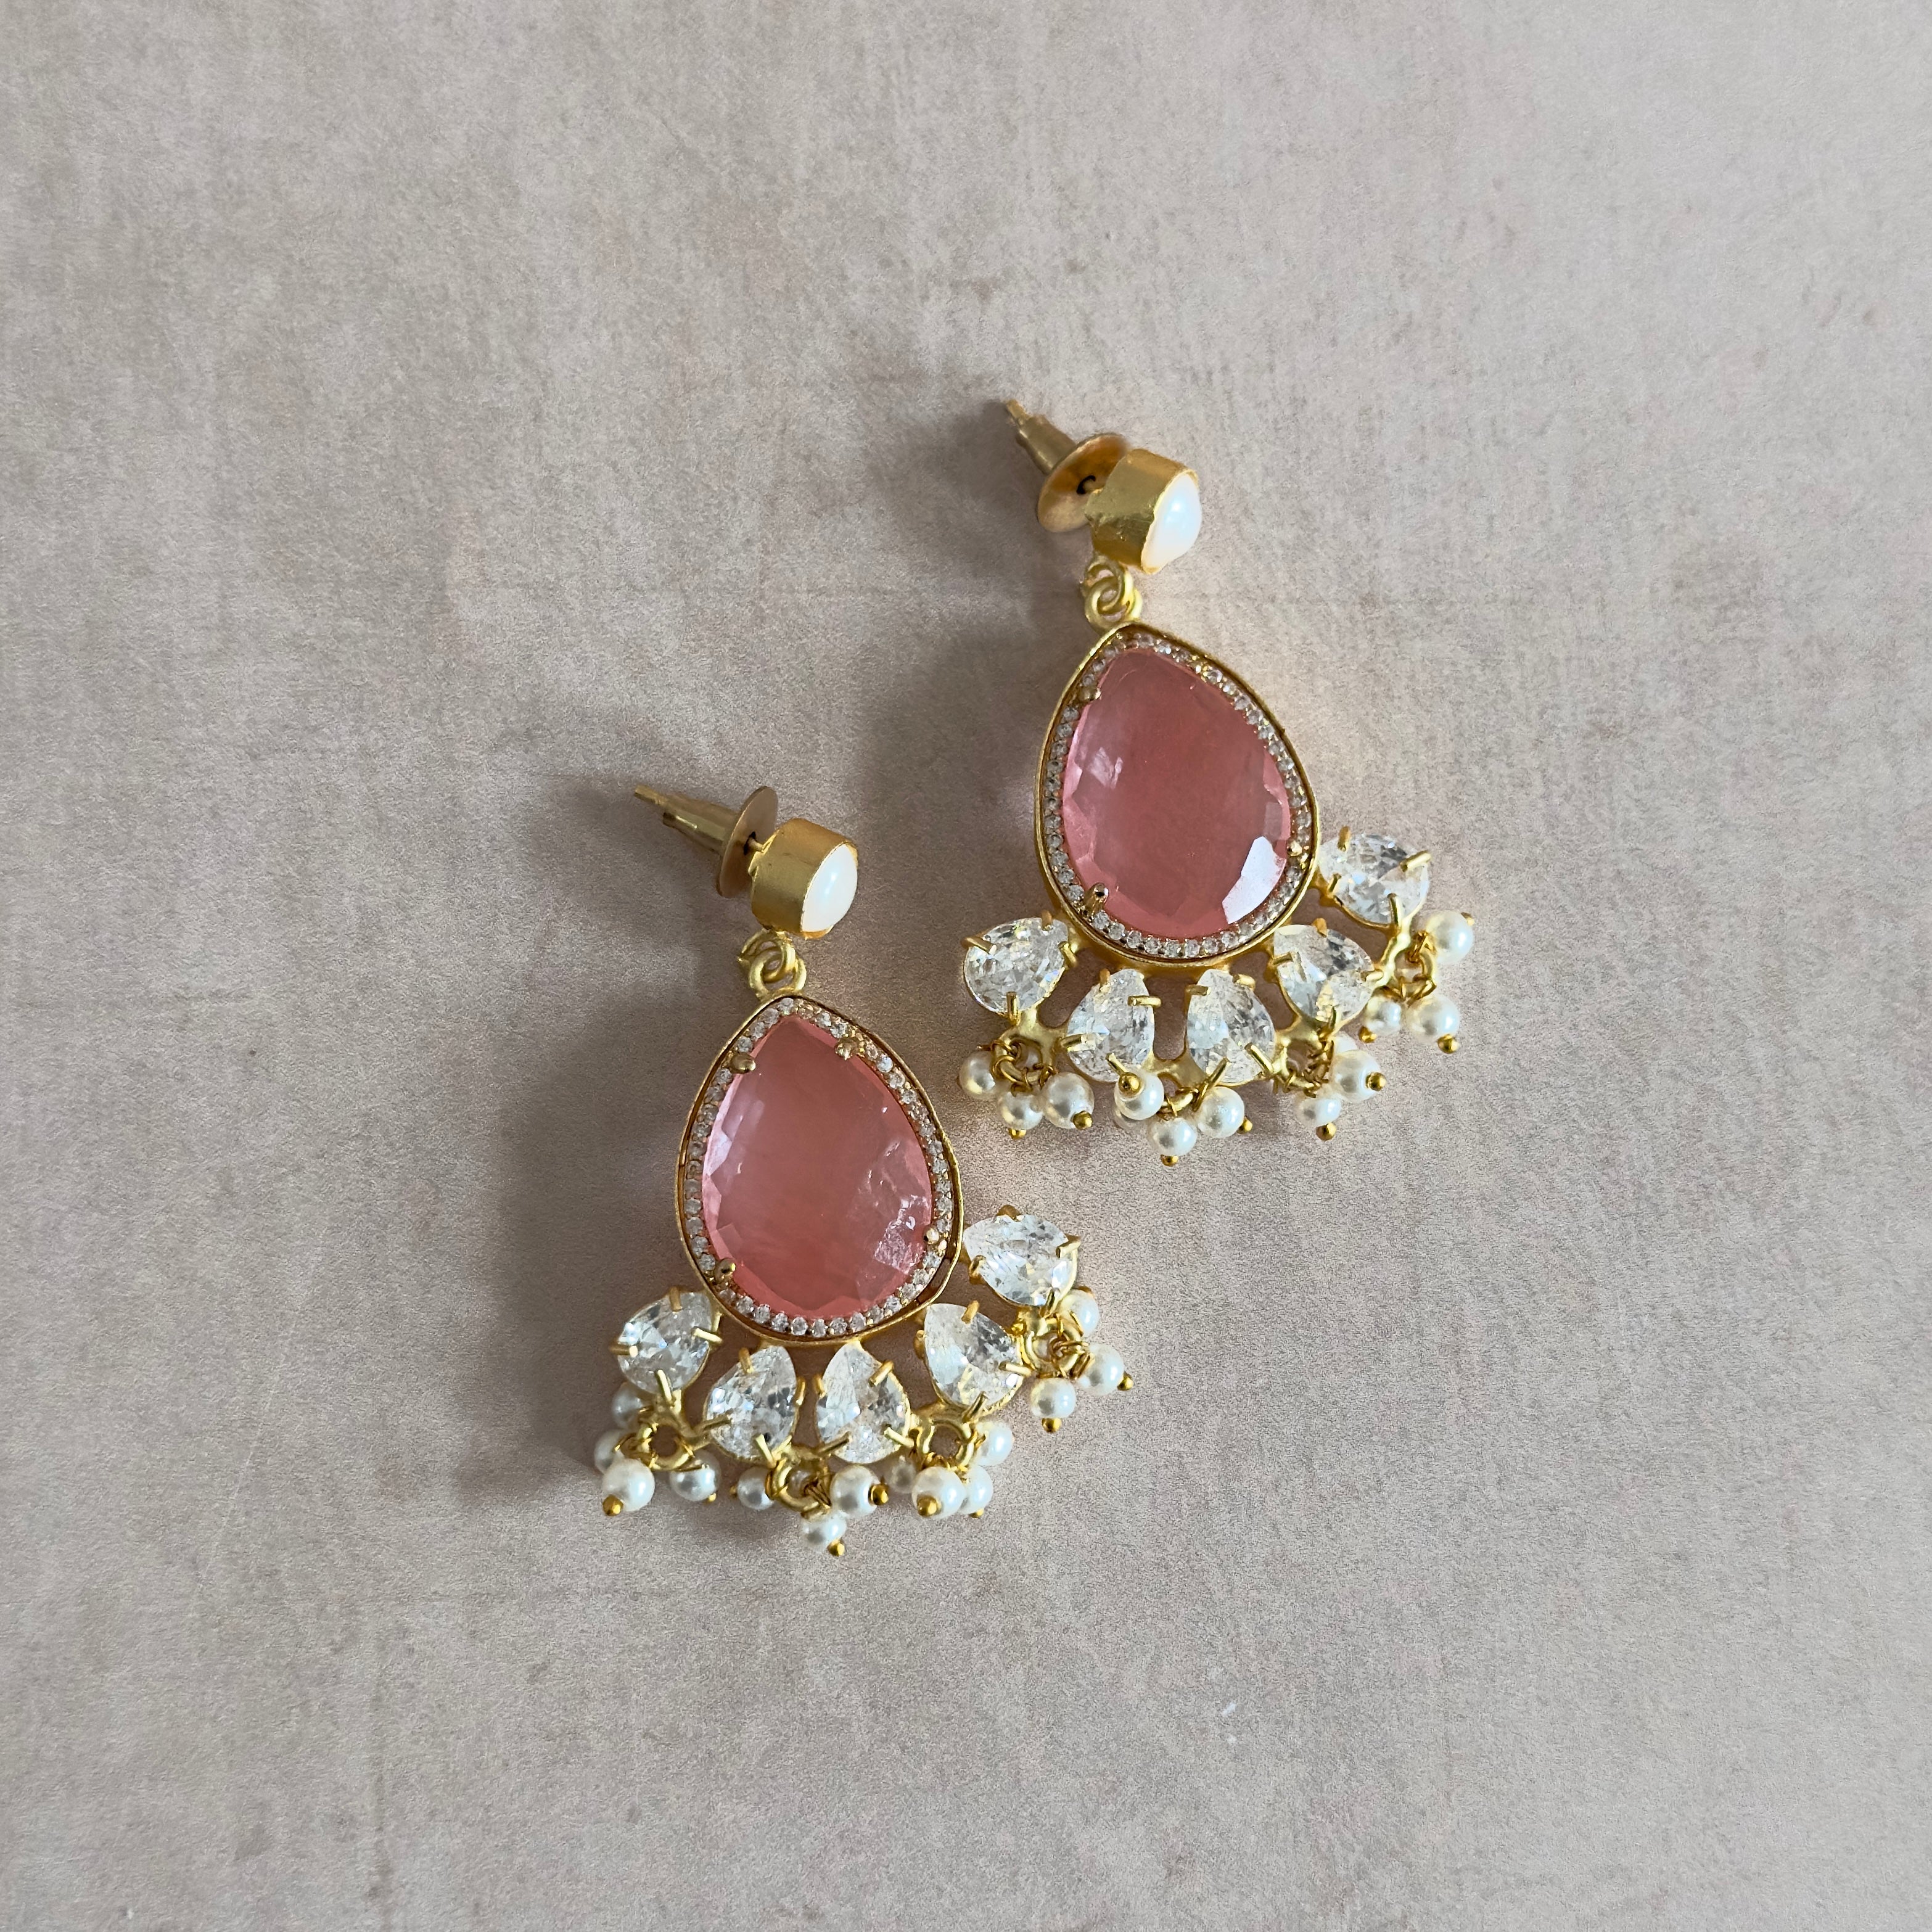 Enhance your style with our Molly Crystal Drop Earrings! Featuring a stunning crimson crystal with delicate pearl accents and sparkling cubic zirconia, these earrings will add a touch of elegance and glamour to any outfit. Elevate your look and shine bright with these eye-catching earrings.